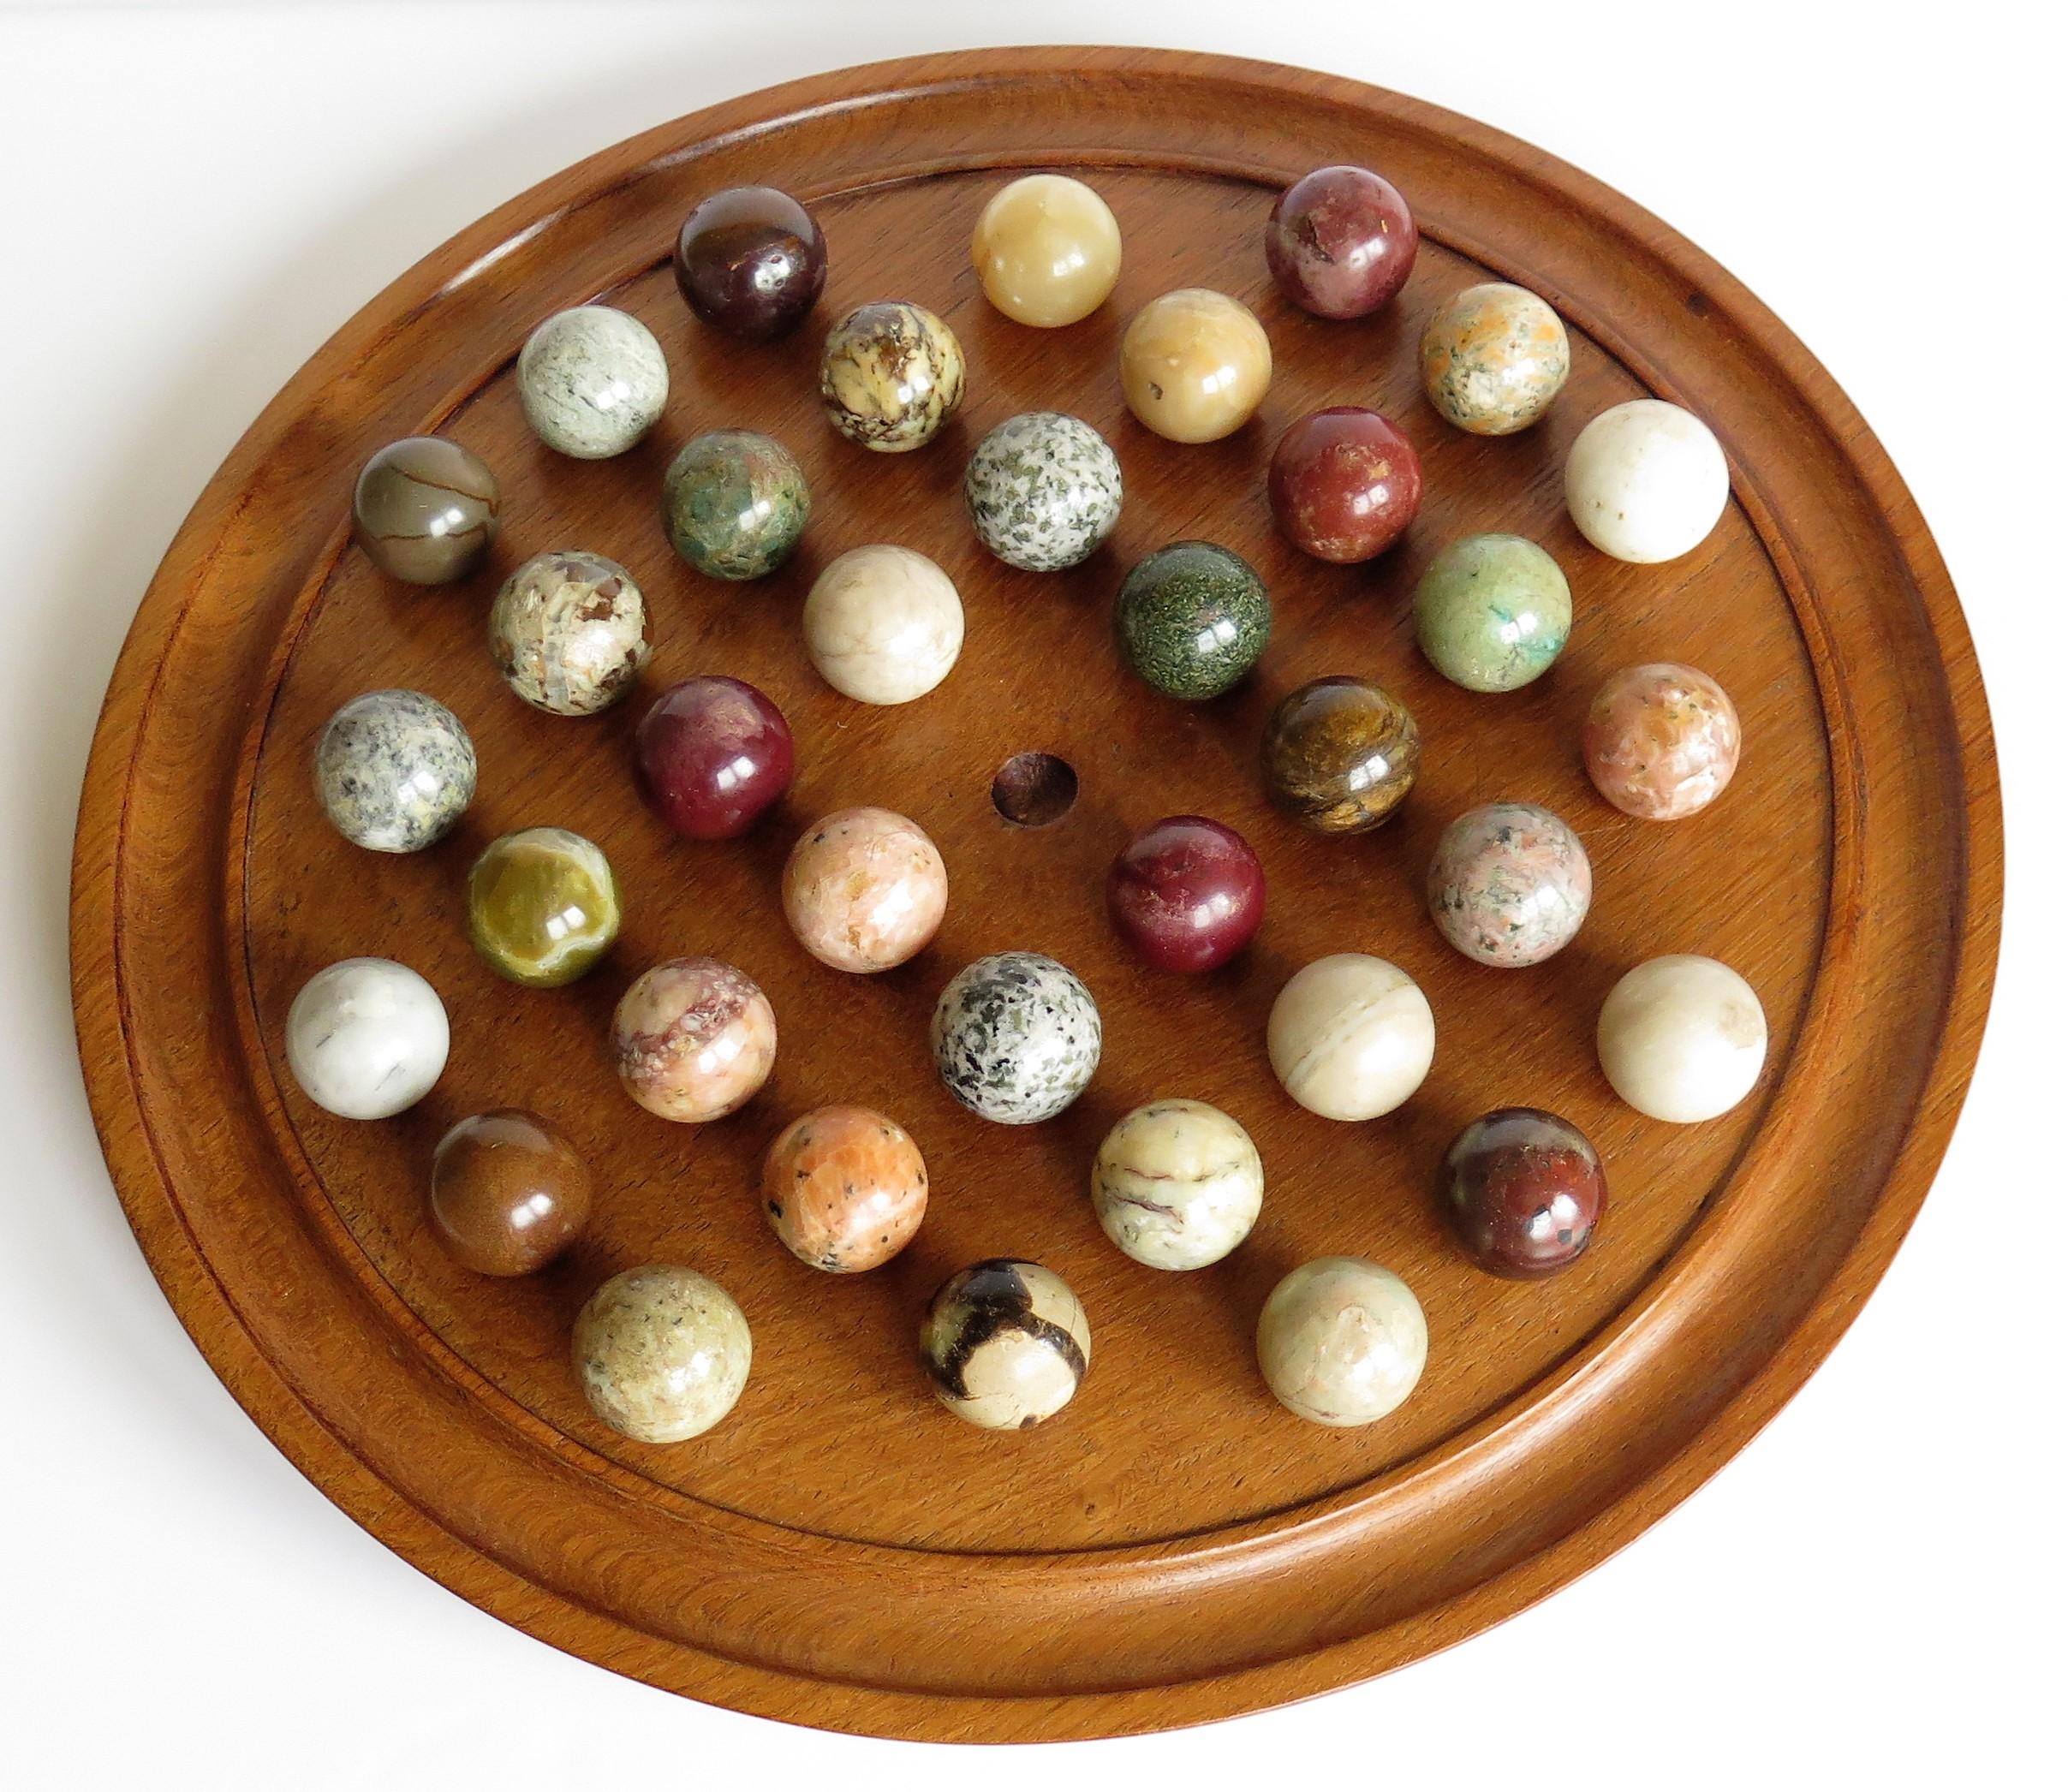 Metal Steel Marbles ball bearing Collectors or traditional game solitaire 